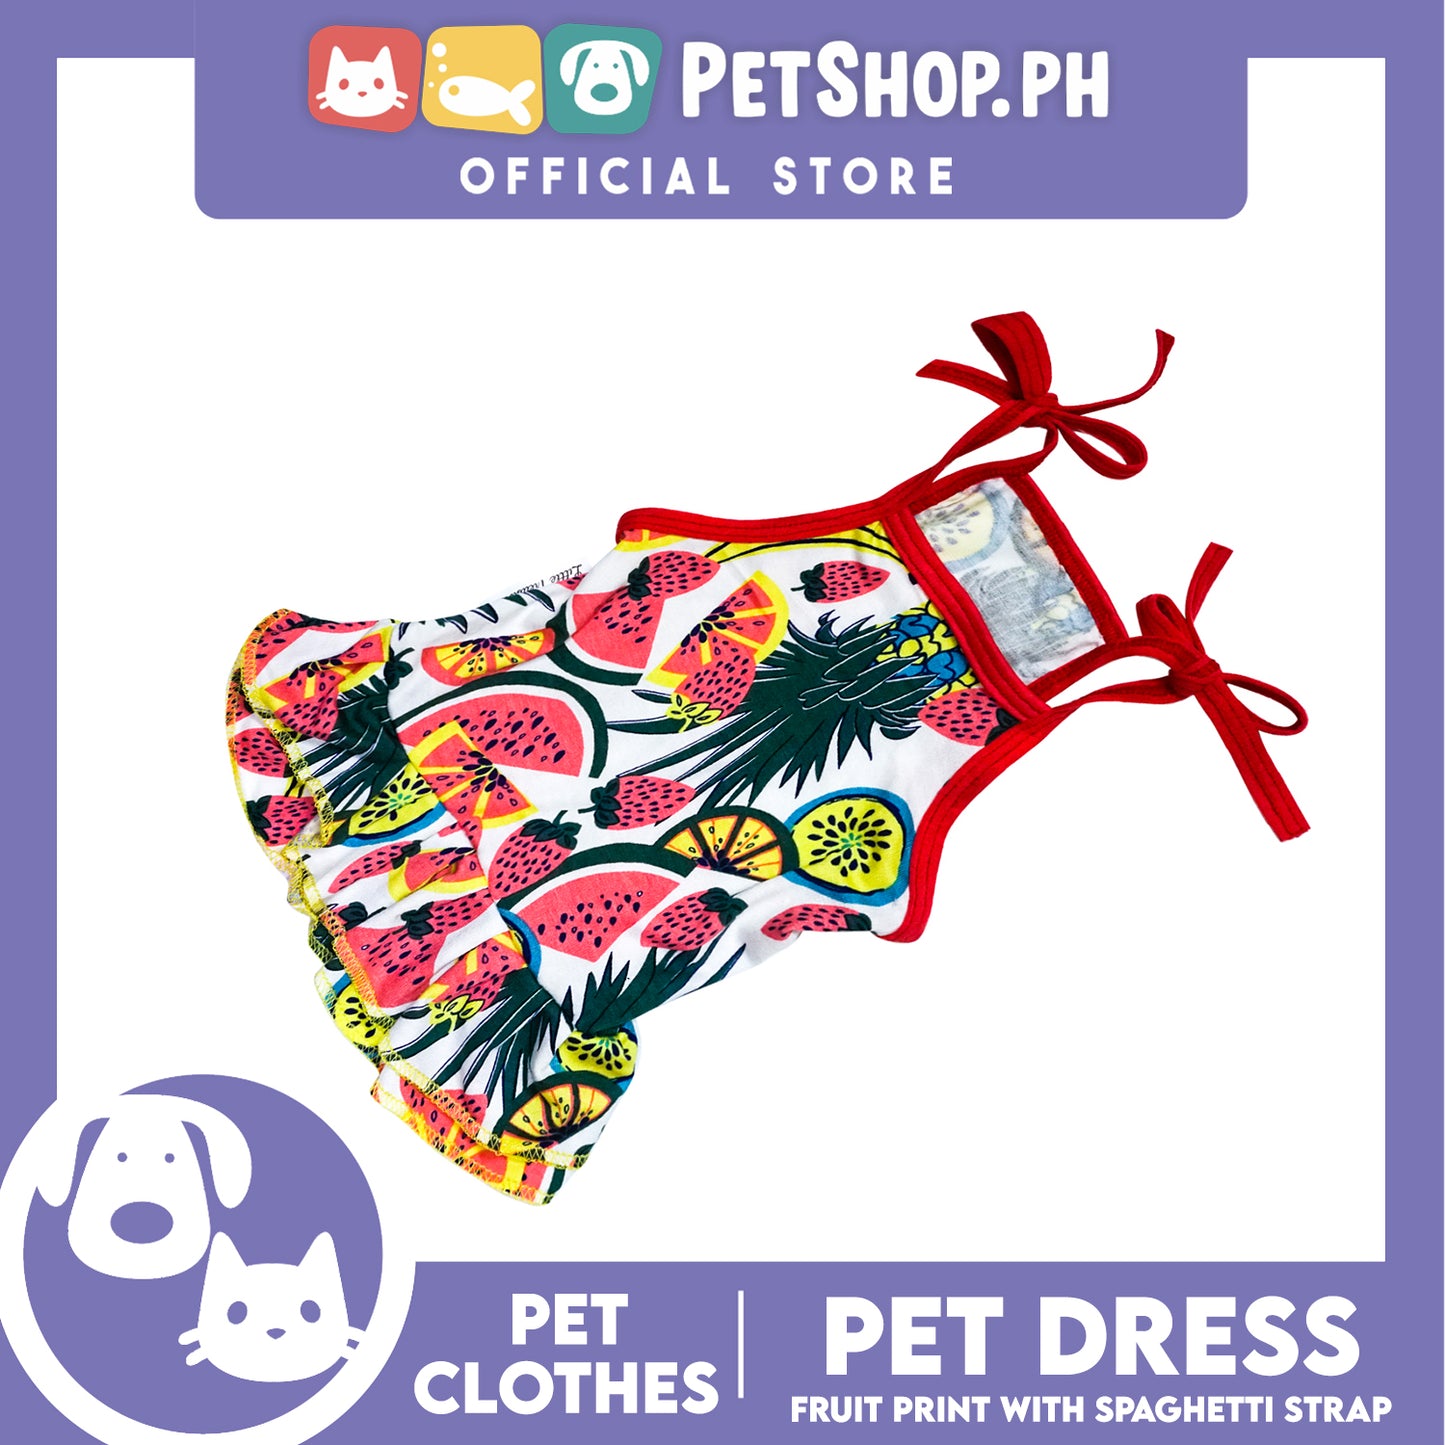 Pet Dress Fruit Print with Spaghetti Strap (Medium) Pet Dress Clothes Perfect for Dogs